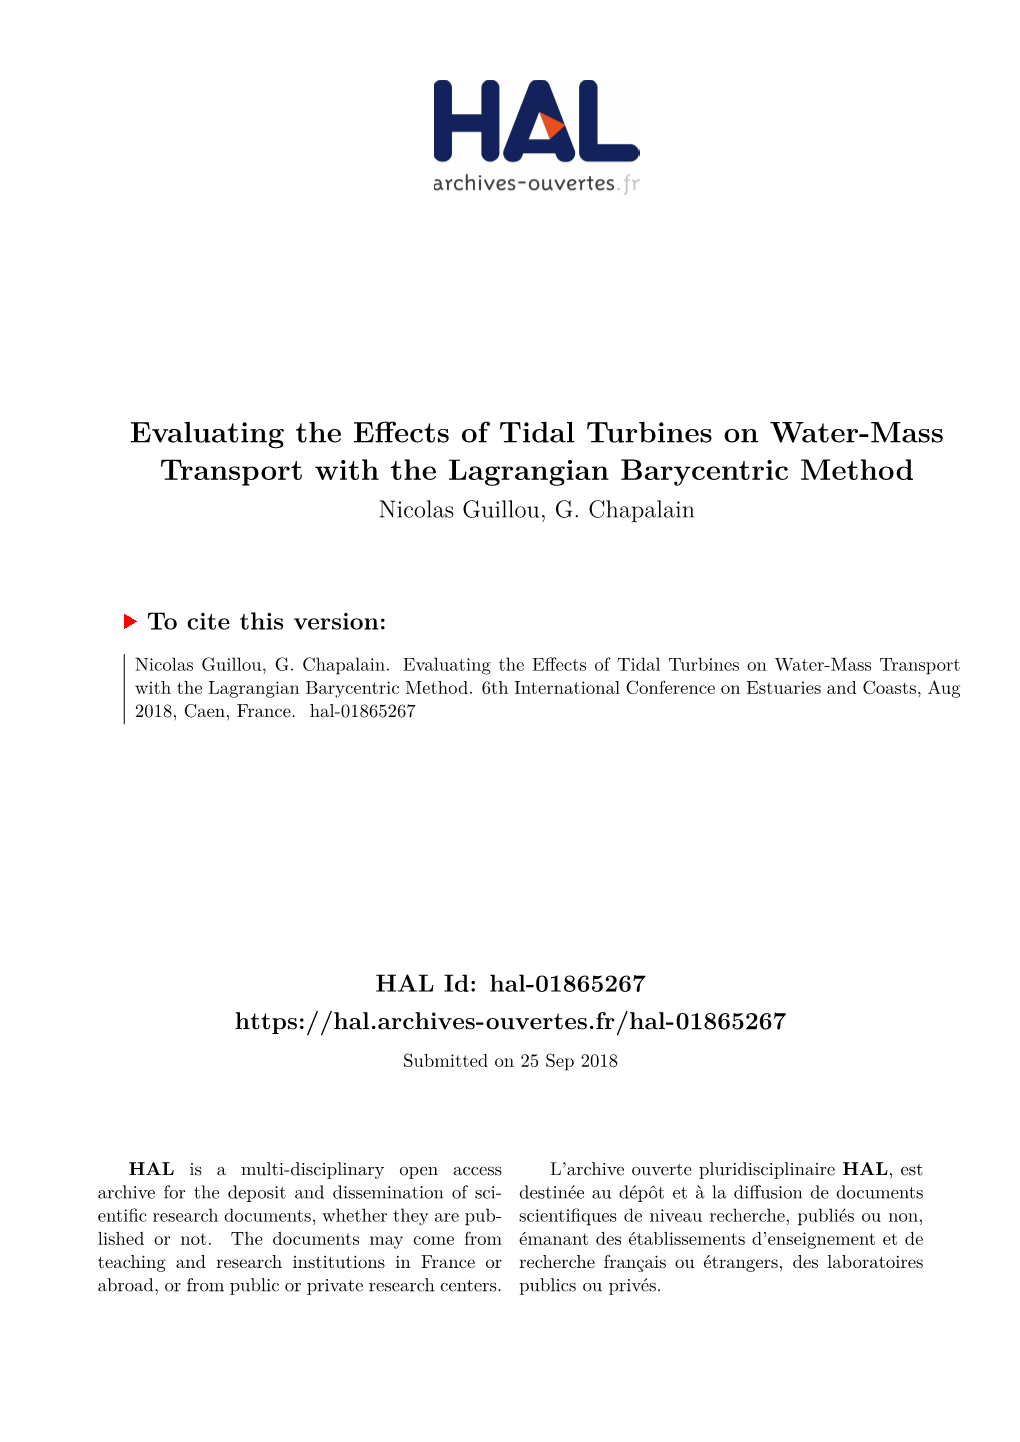 Evaluating the Effects of Tidal Turbines on Water-Mass Transport with the Lagrangian Barycentric Method Nicolas Guillou, G